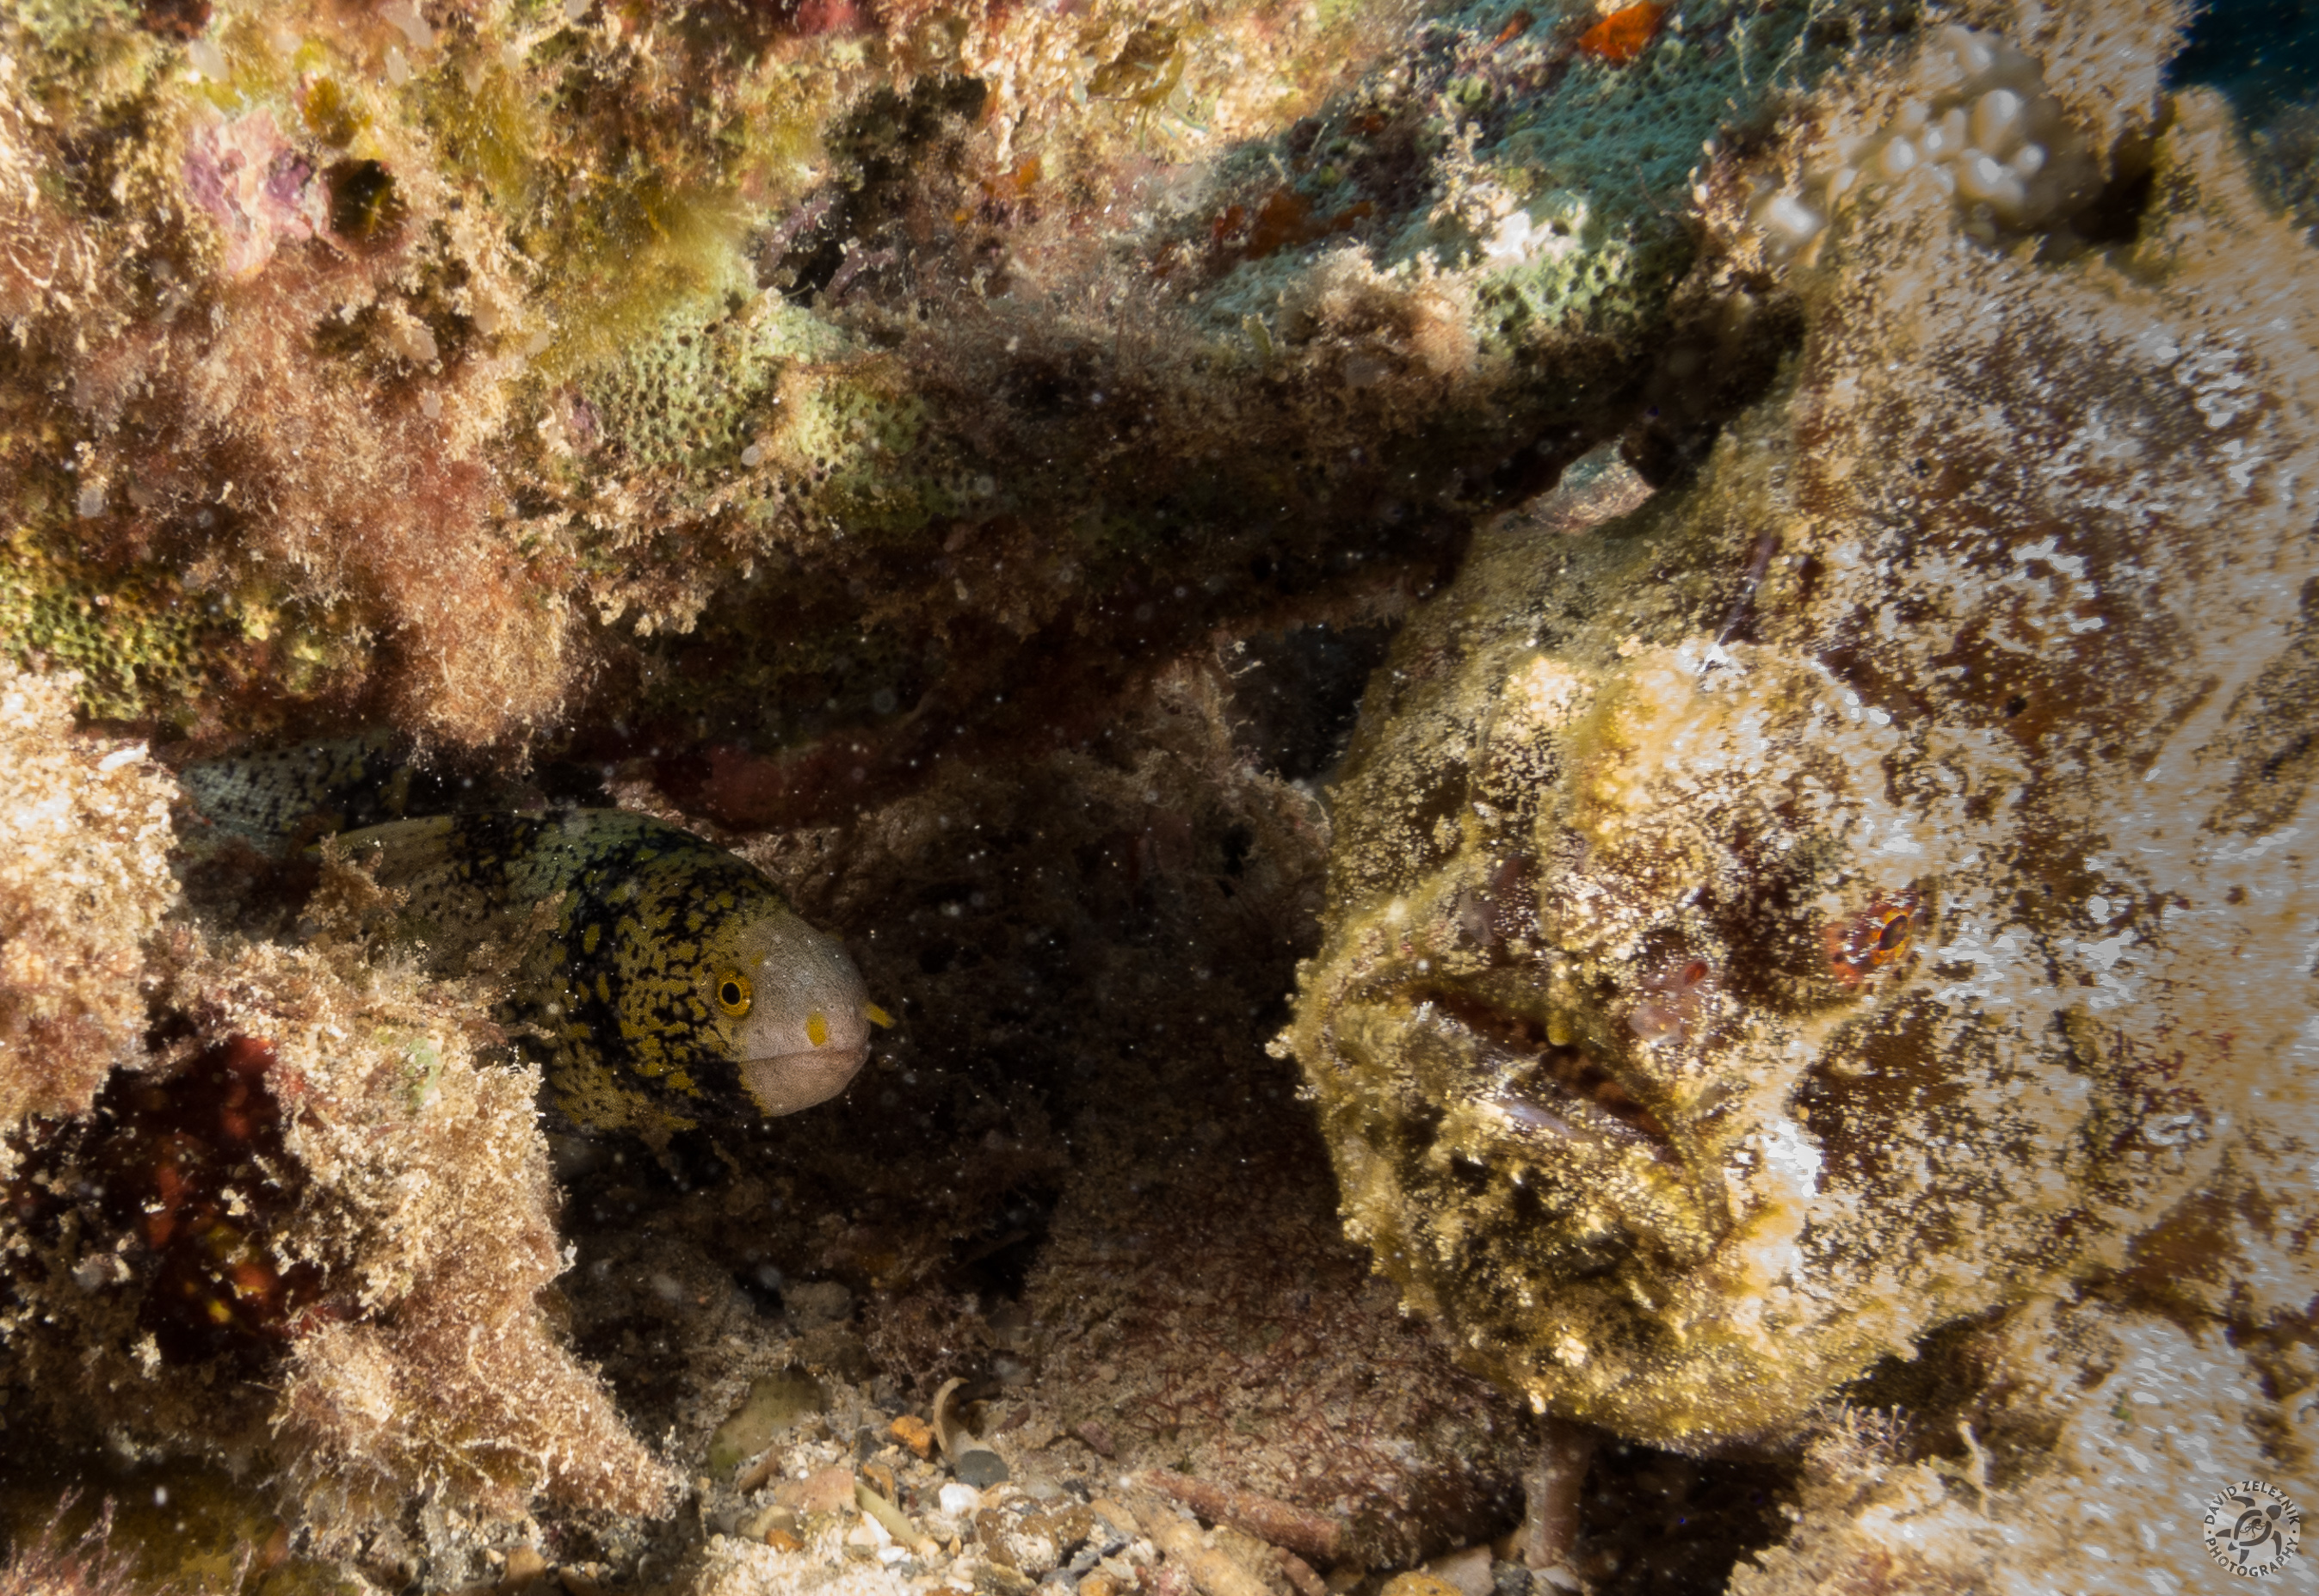 Who's that knocking on my door? I was tracking this tiny Snowflake Moray Eel through the reef and positioned myself to patiently wait it out. I was completely oblivious to the Commerson's Frogfish lurking right outside its door and nearly bumped it with one of my strobes until I lifted my eyes from the viewfinder to realize the reason for the eel's shyness to emerge.